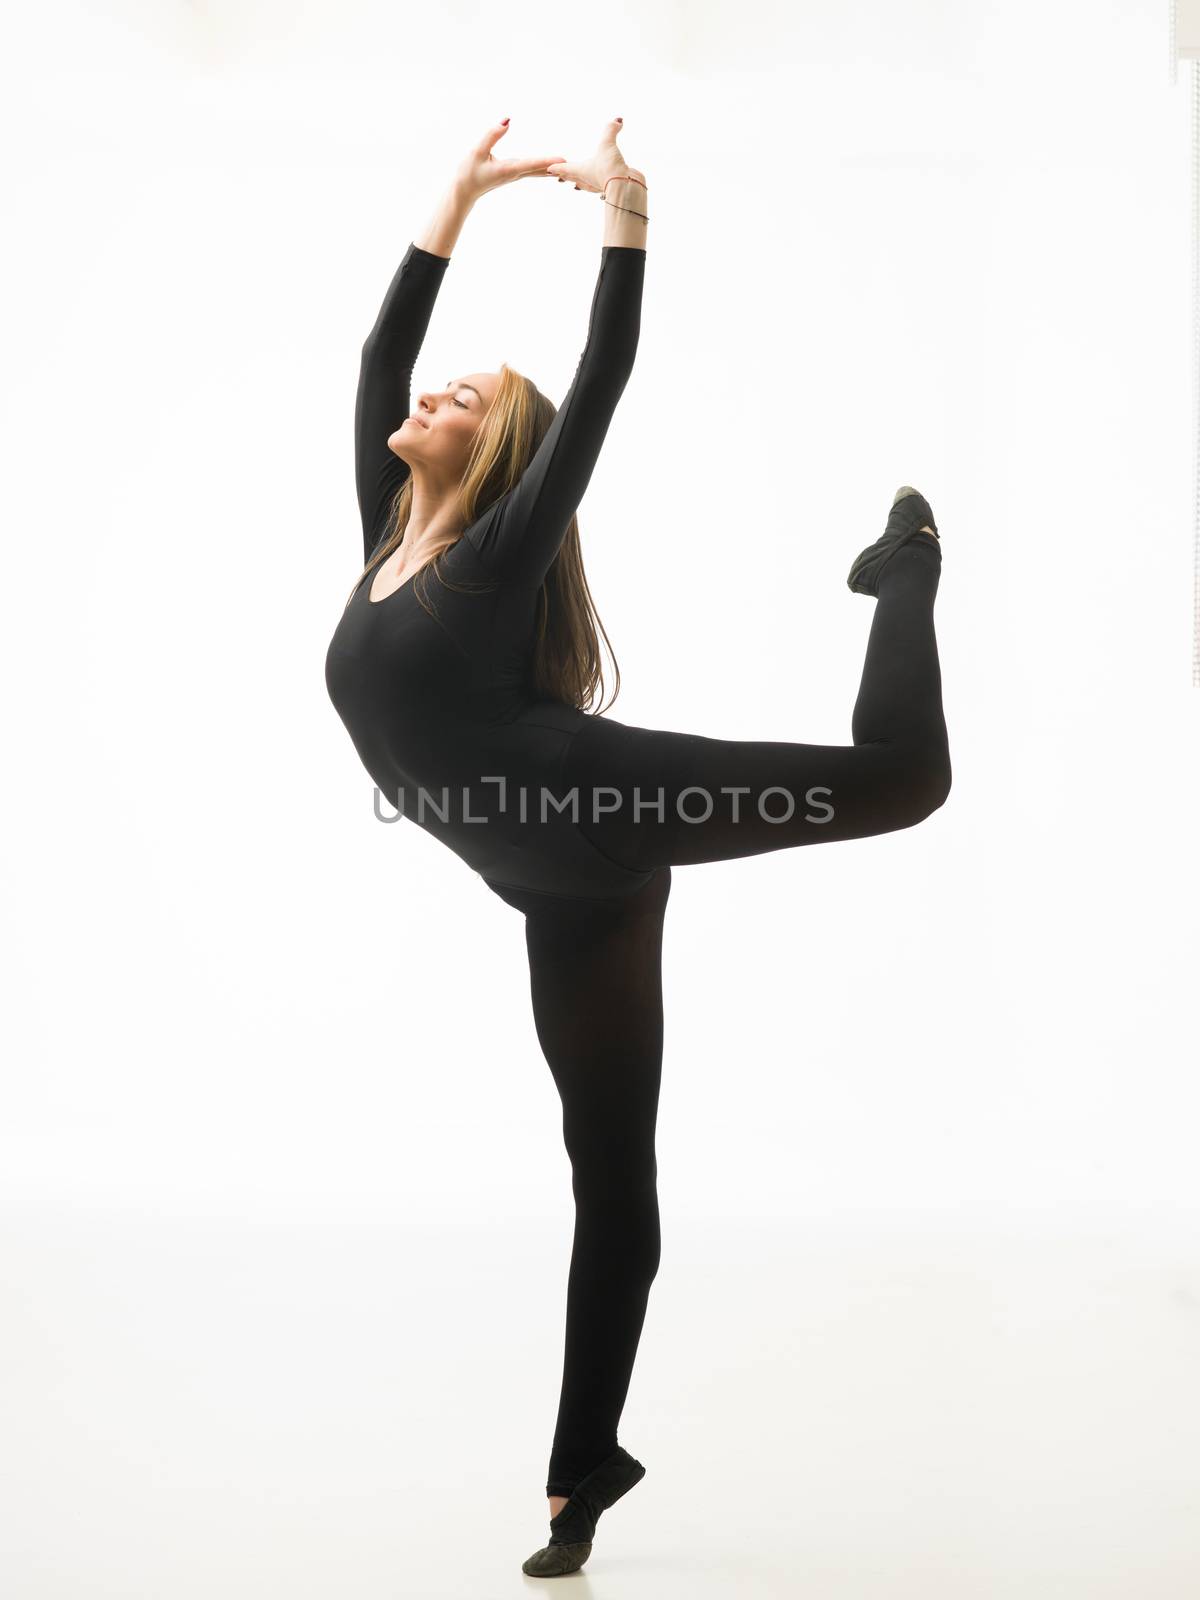 young beautiful dancer standing on tiptoe and posing, on white background